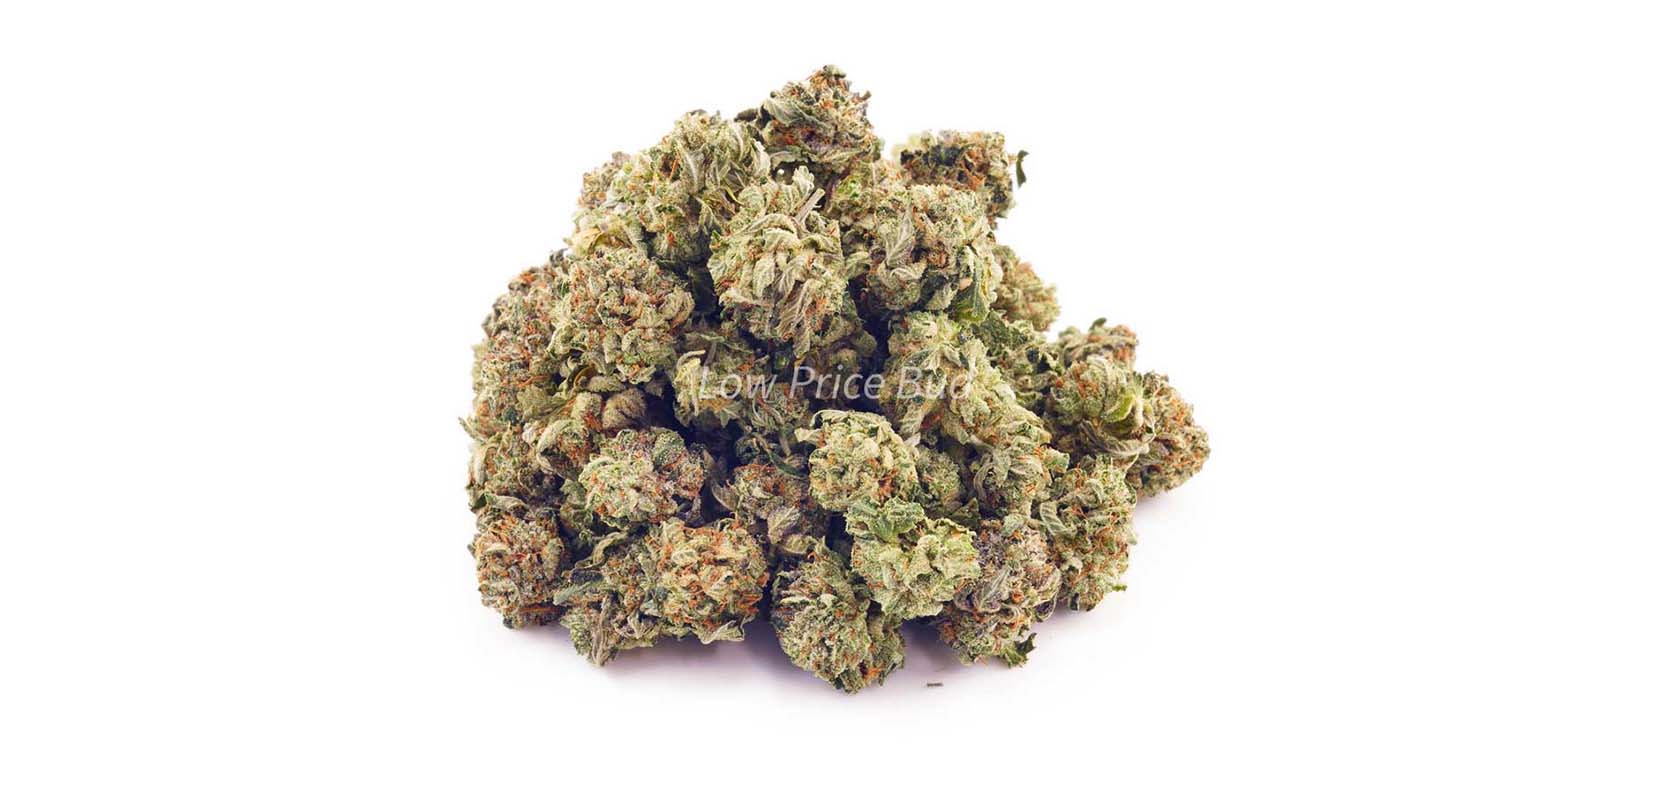 El Jefe budget buds dispensary weed from Low Price Bud online dispensary Canada to buy weed online for mail order marijuana weed delivery.